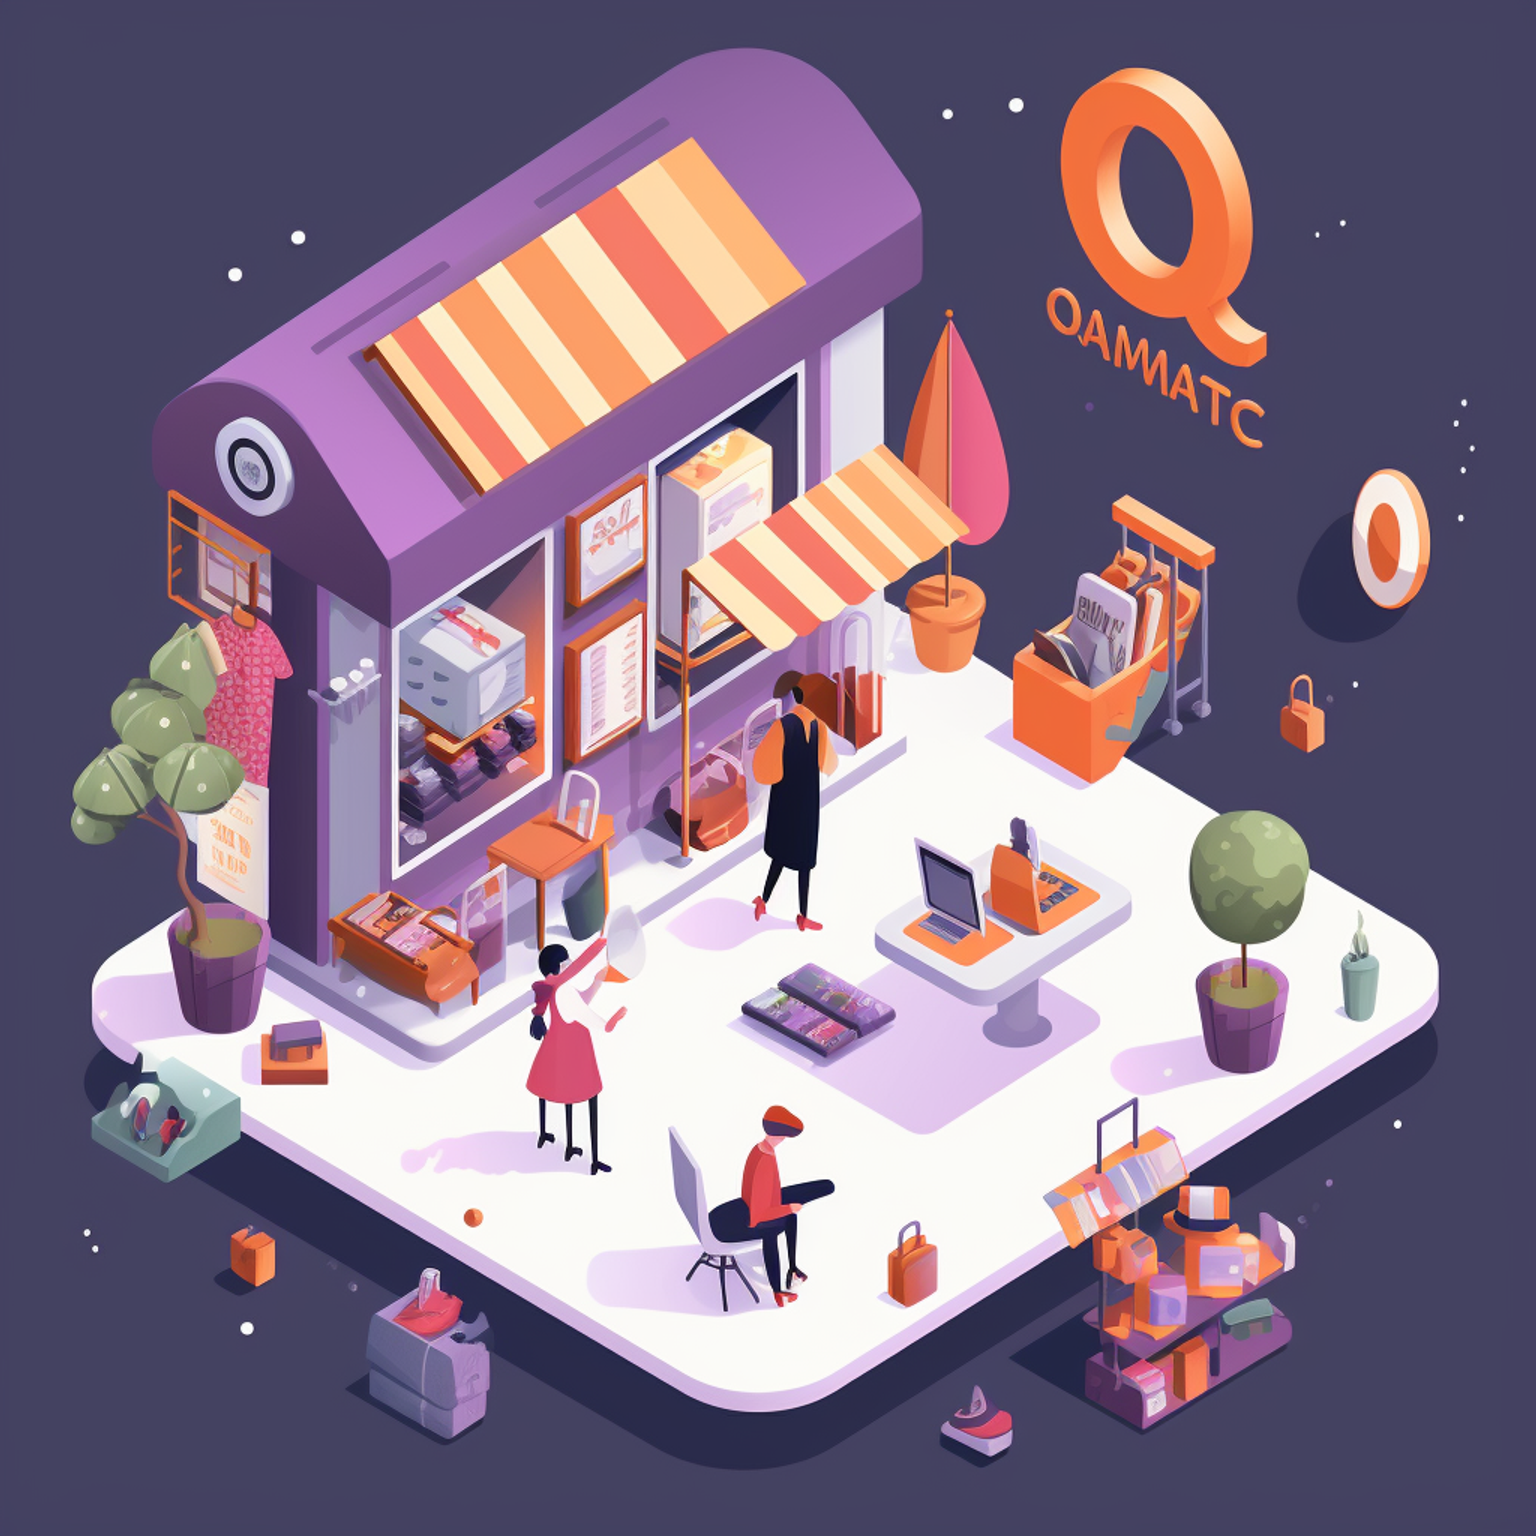 Illustration of a fictional q-commerce shopping mall